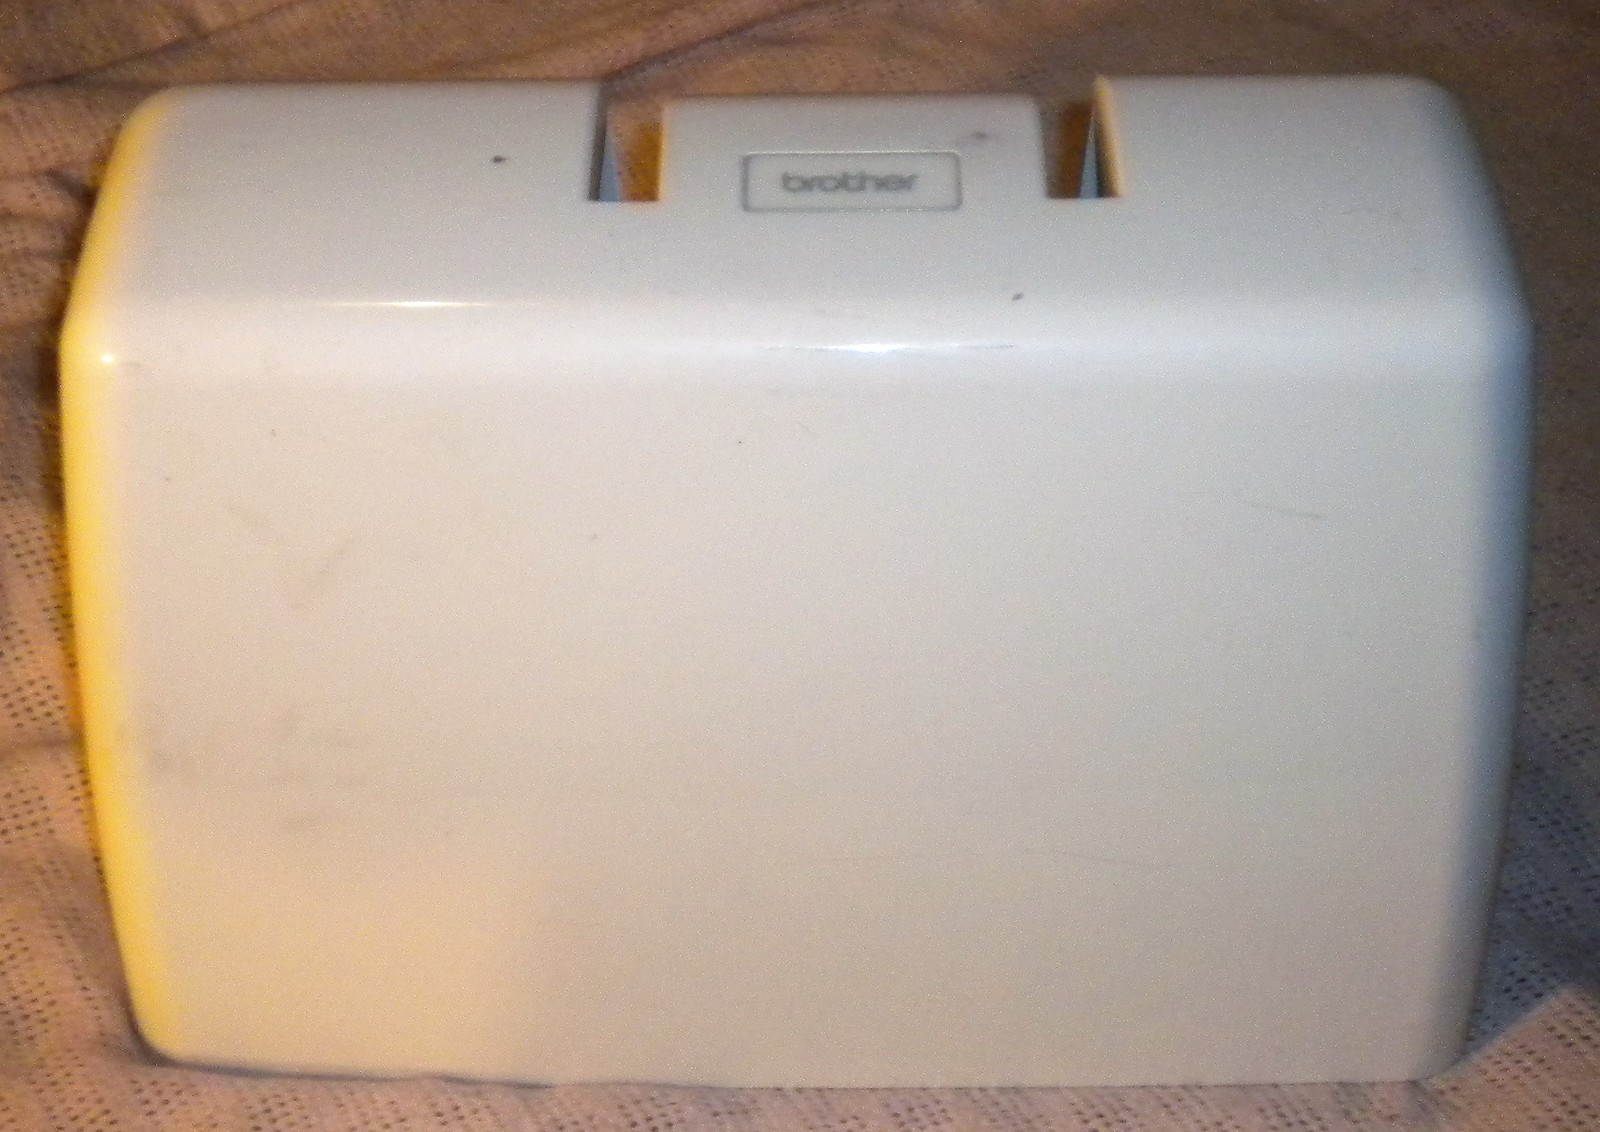 Plastic XR-52 Brother Dust Cover Good Shape No Chips or Cracks - $12.50